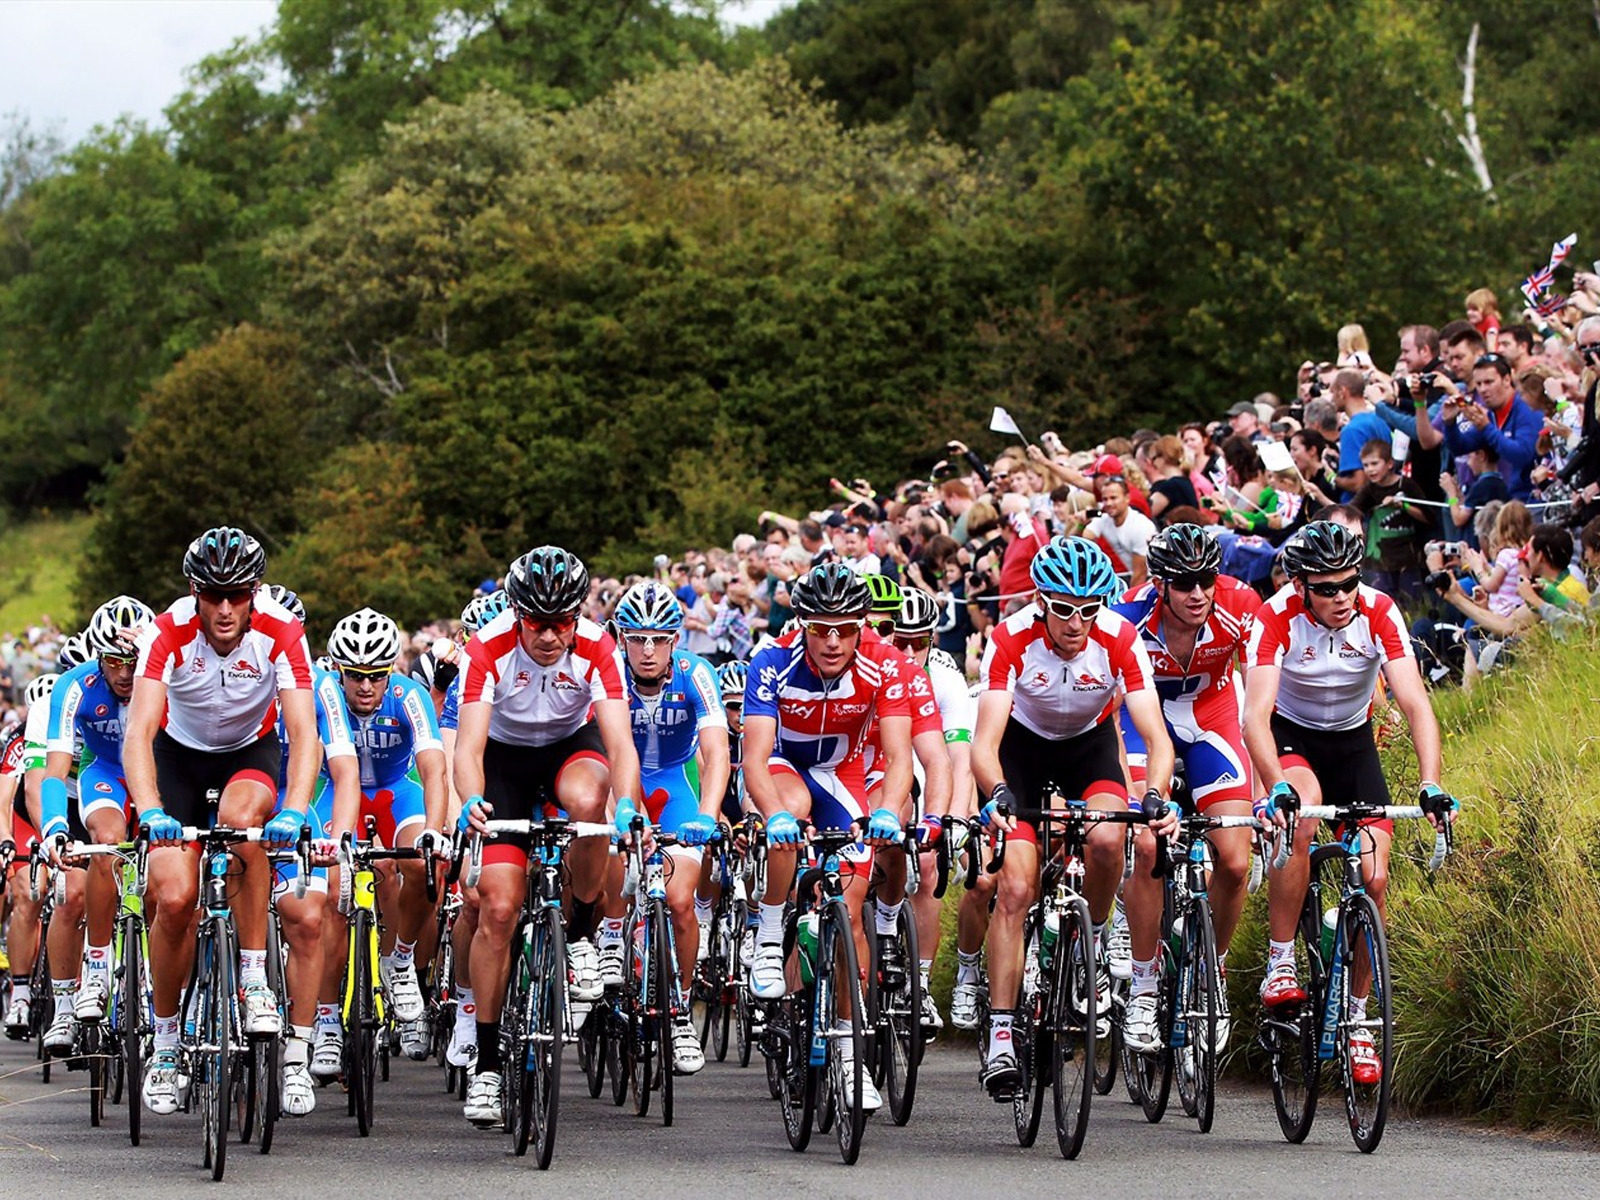 Surrey Cycle Classic for 1600 x 1200 resolution